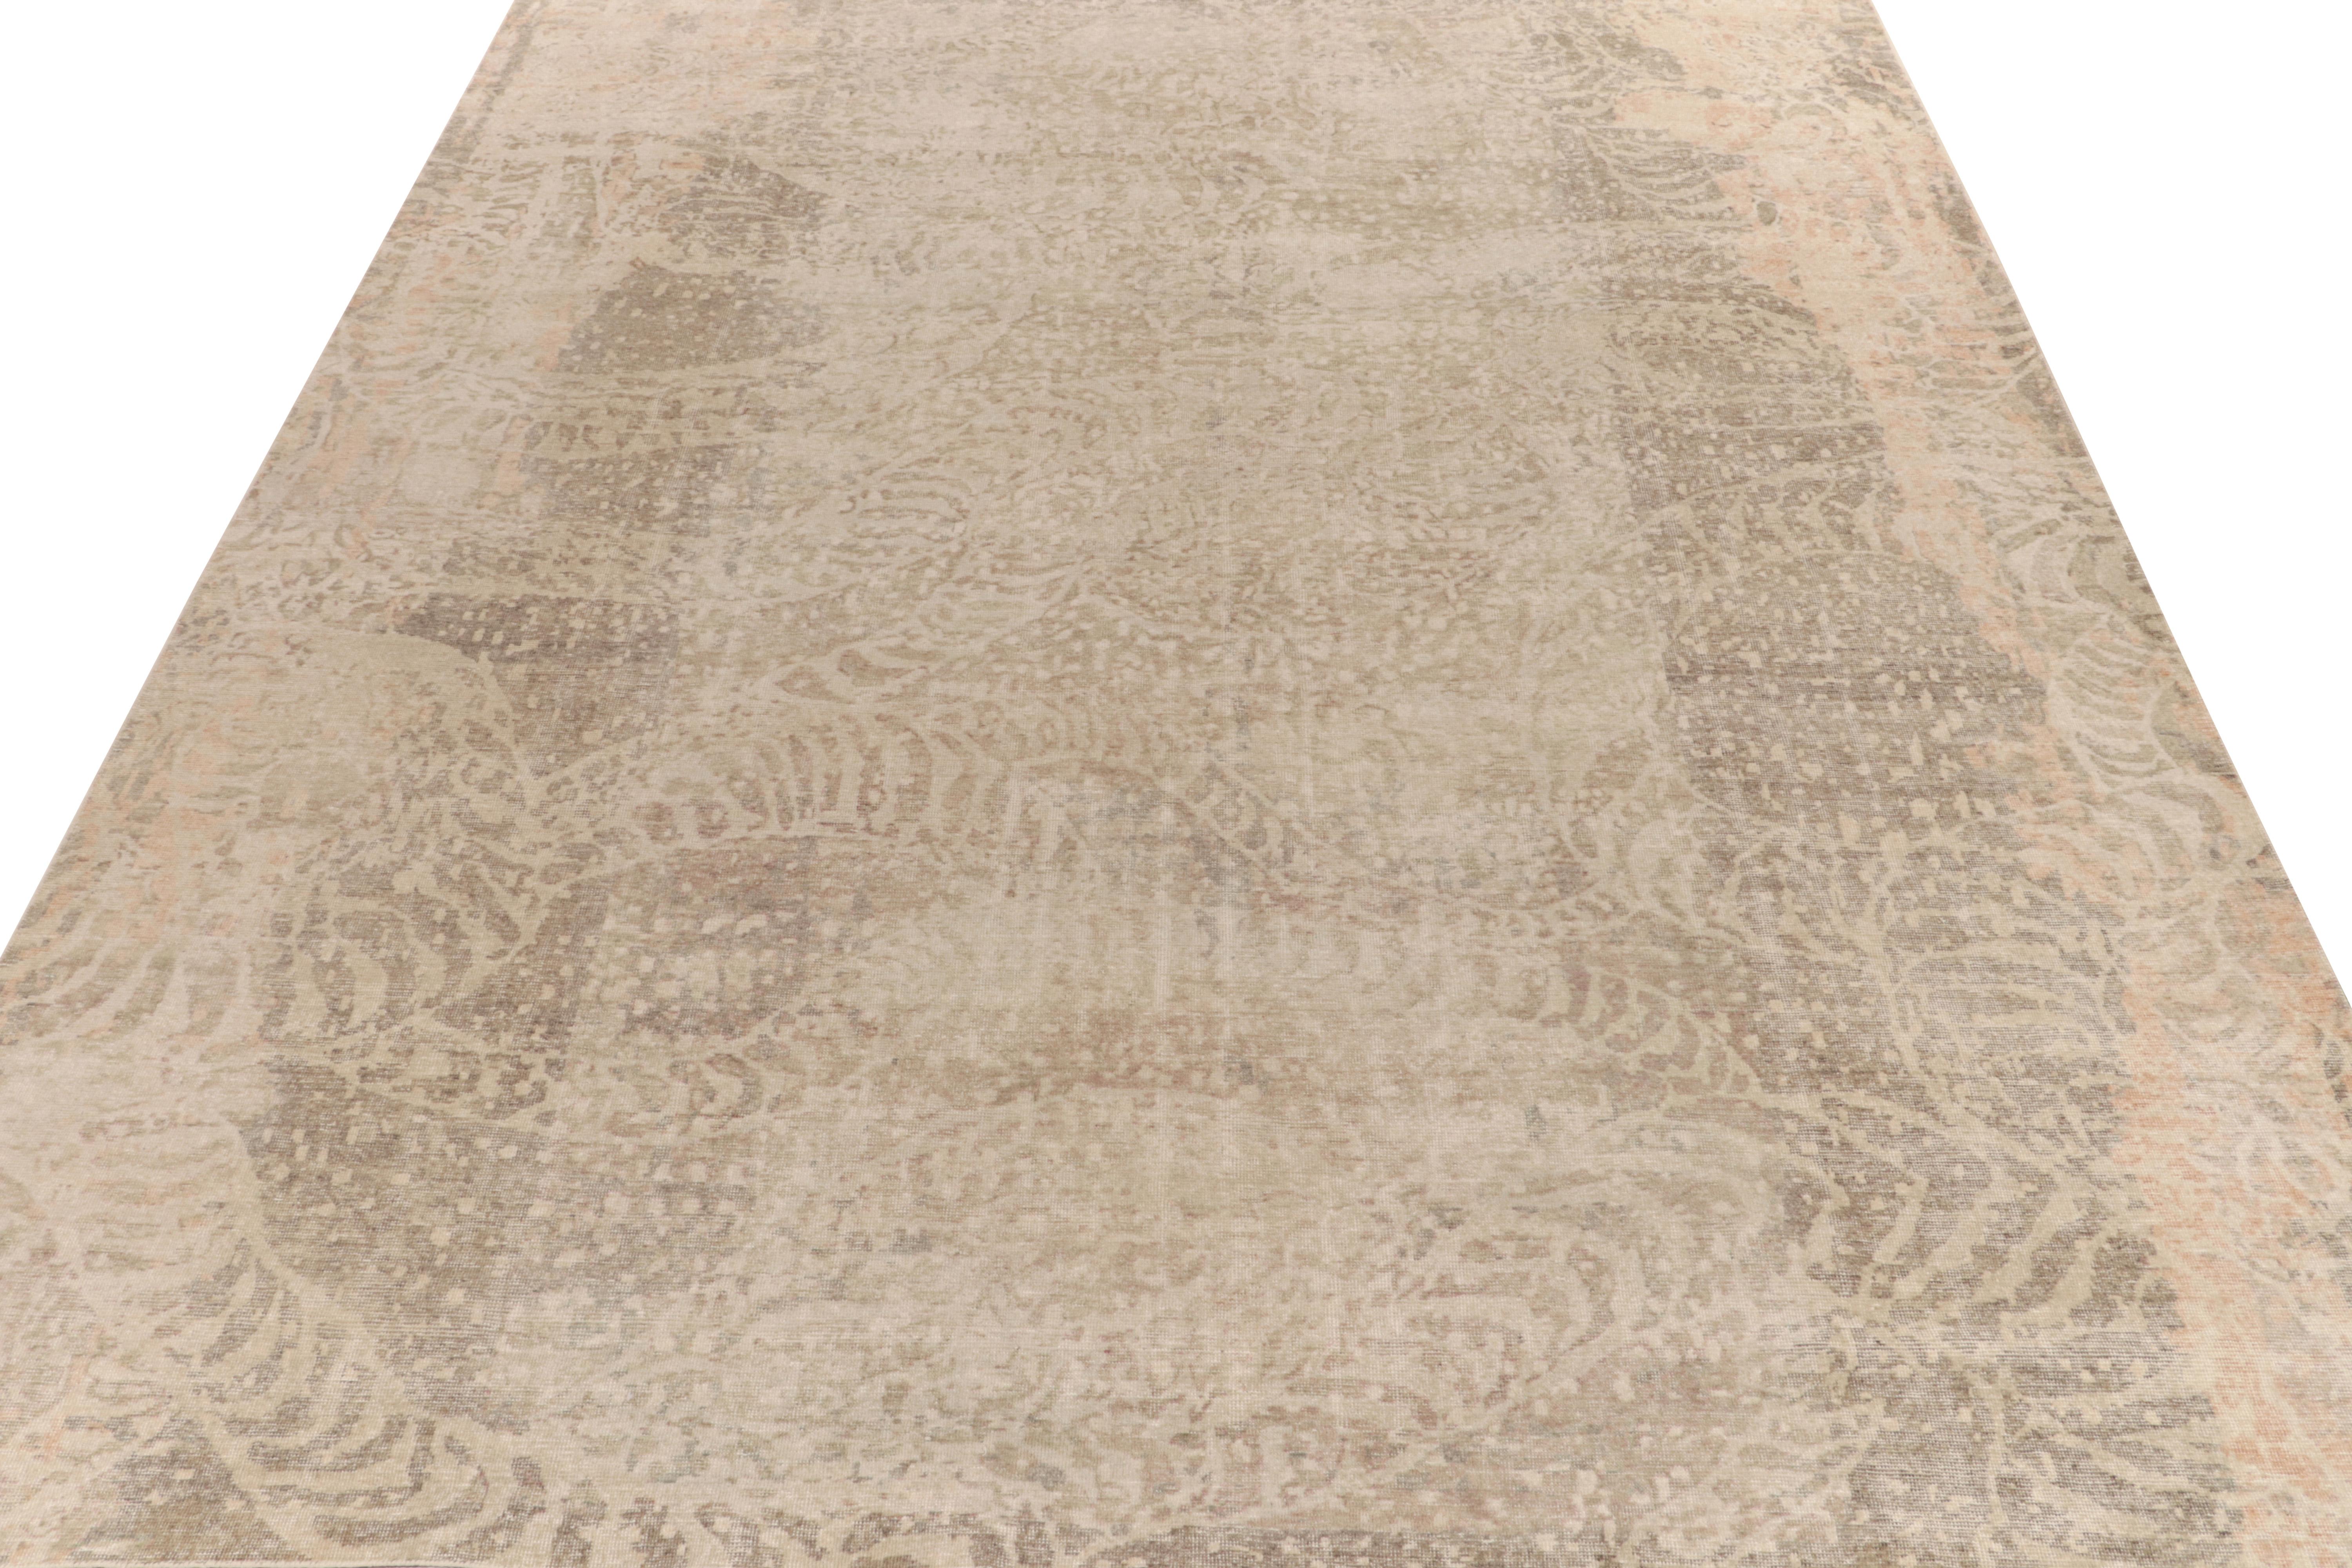 From Rug & Kilim’s Homage collection, a 12x15 distressed style abstract rug relishing a forgiving play of beige-brown and gray for a comfortable allure. Punctuated by warm kisses of pink in the border and dot patterns, the subtlety of color and